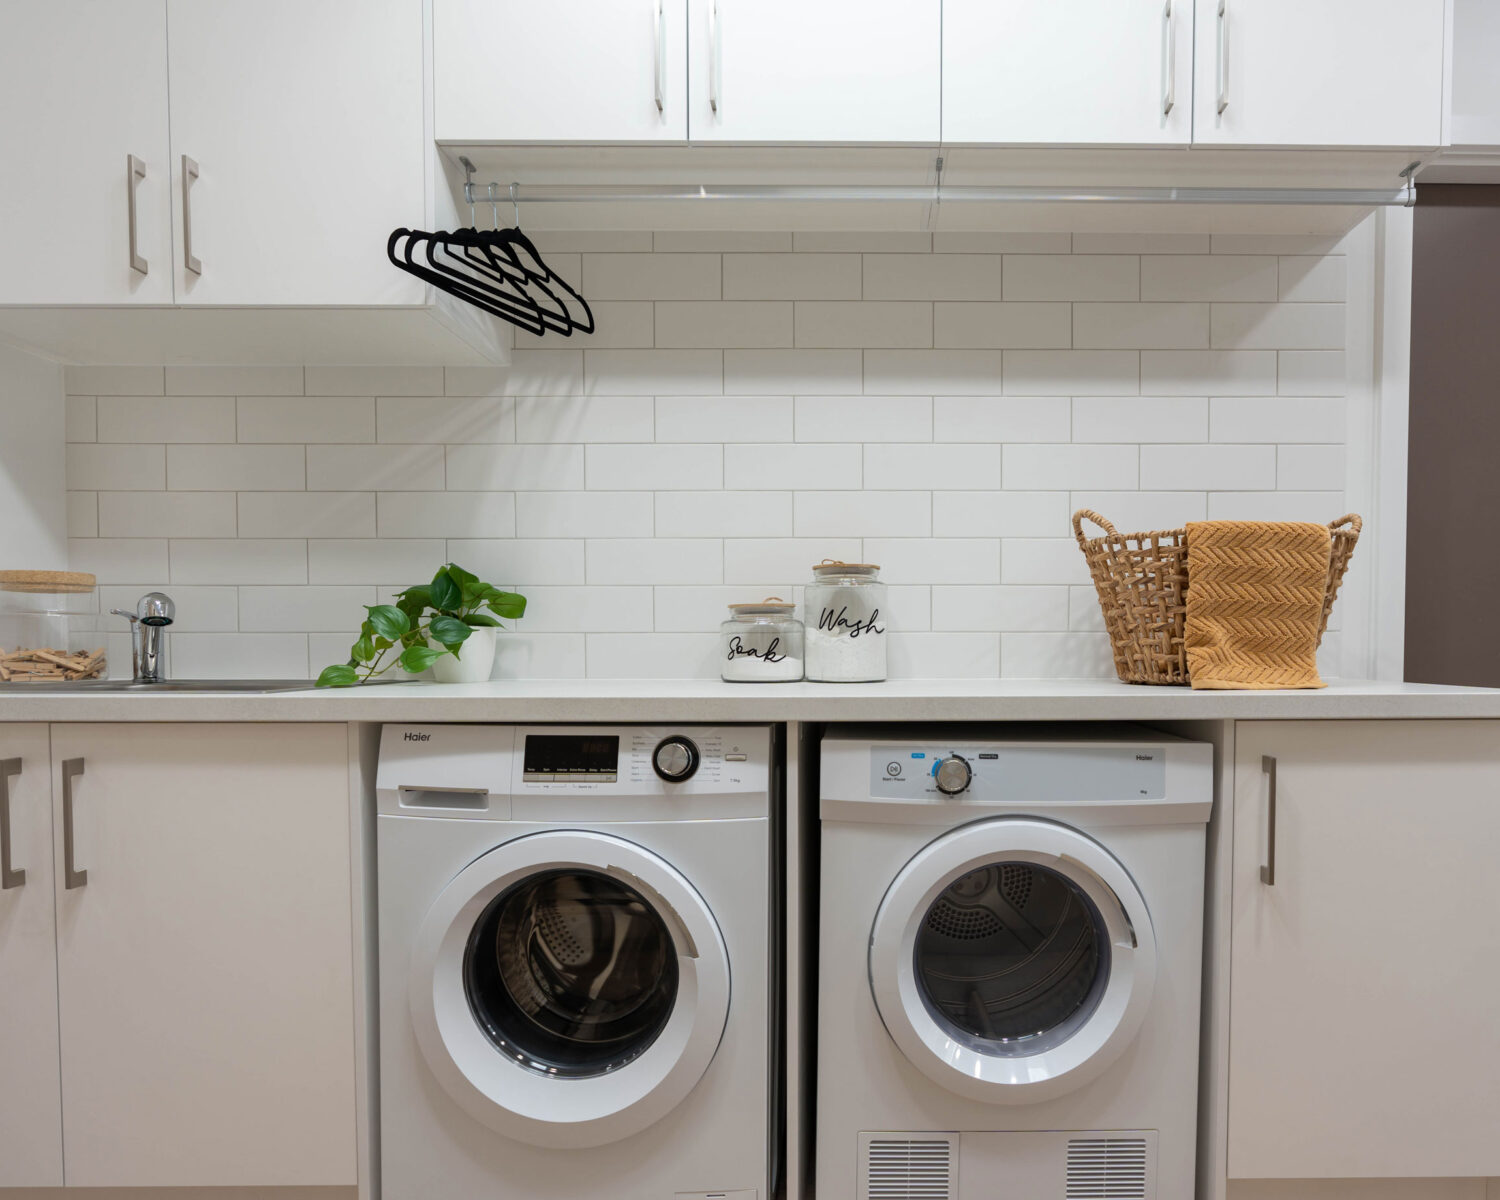 Image of a white laundry with brick bond pattern whtie subway tiles. Using a hanging rail adds functionality to the space